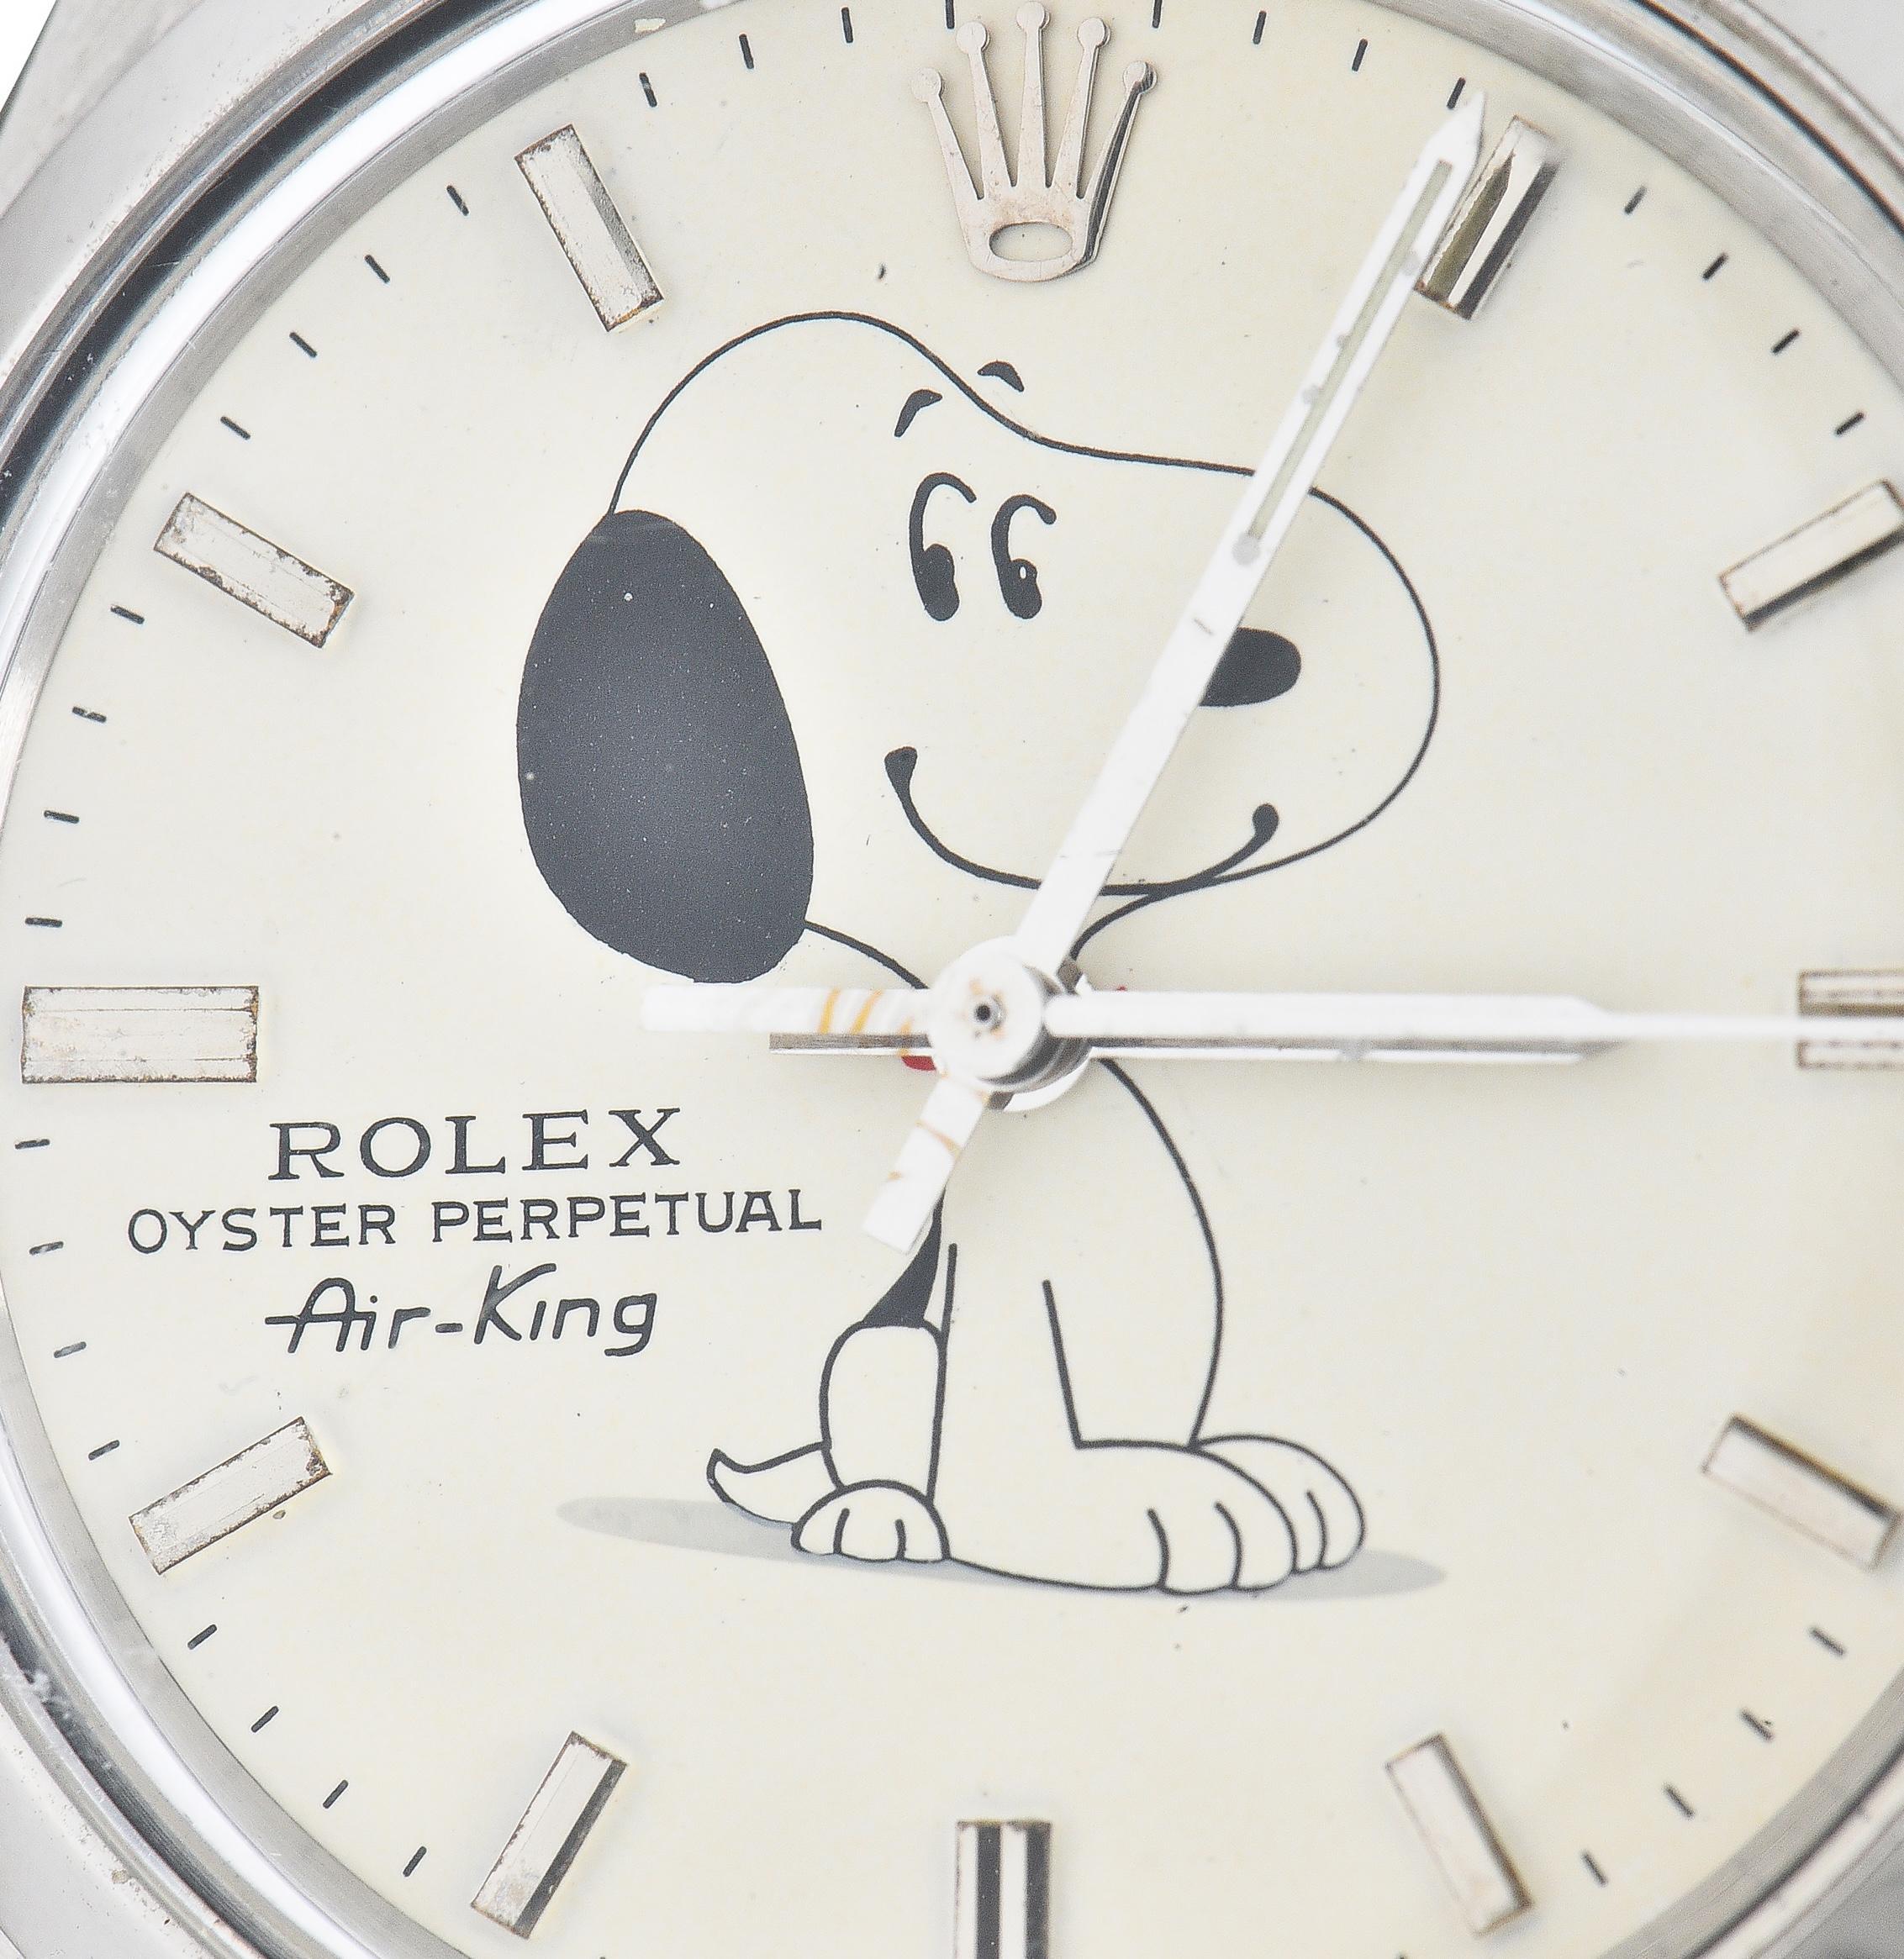 1984 Rolex 34 MM Stainless Steel Oyster Perpetual Air King Snoopy Watch 2